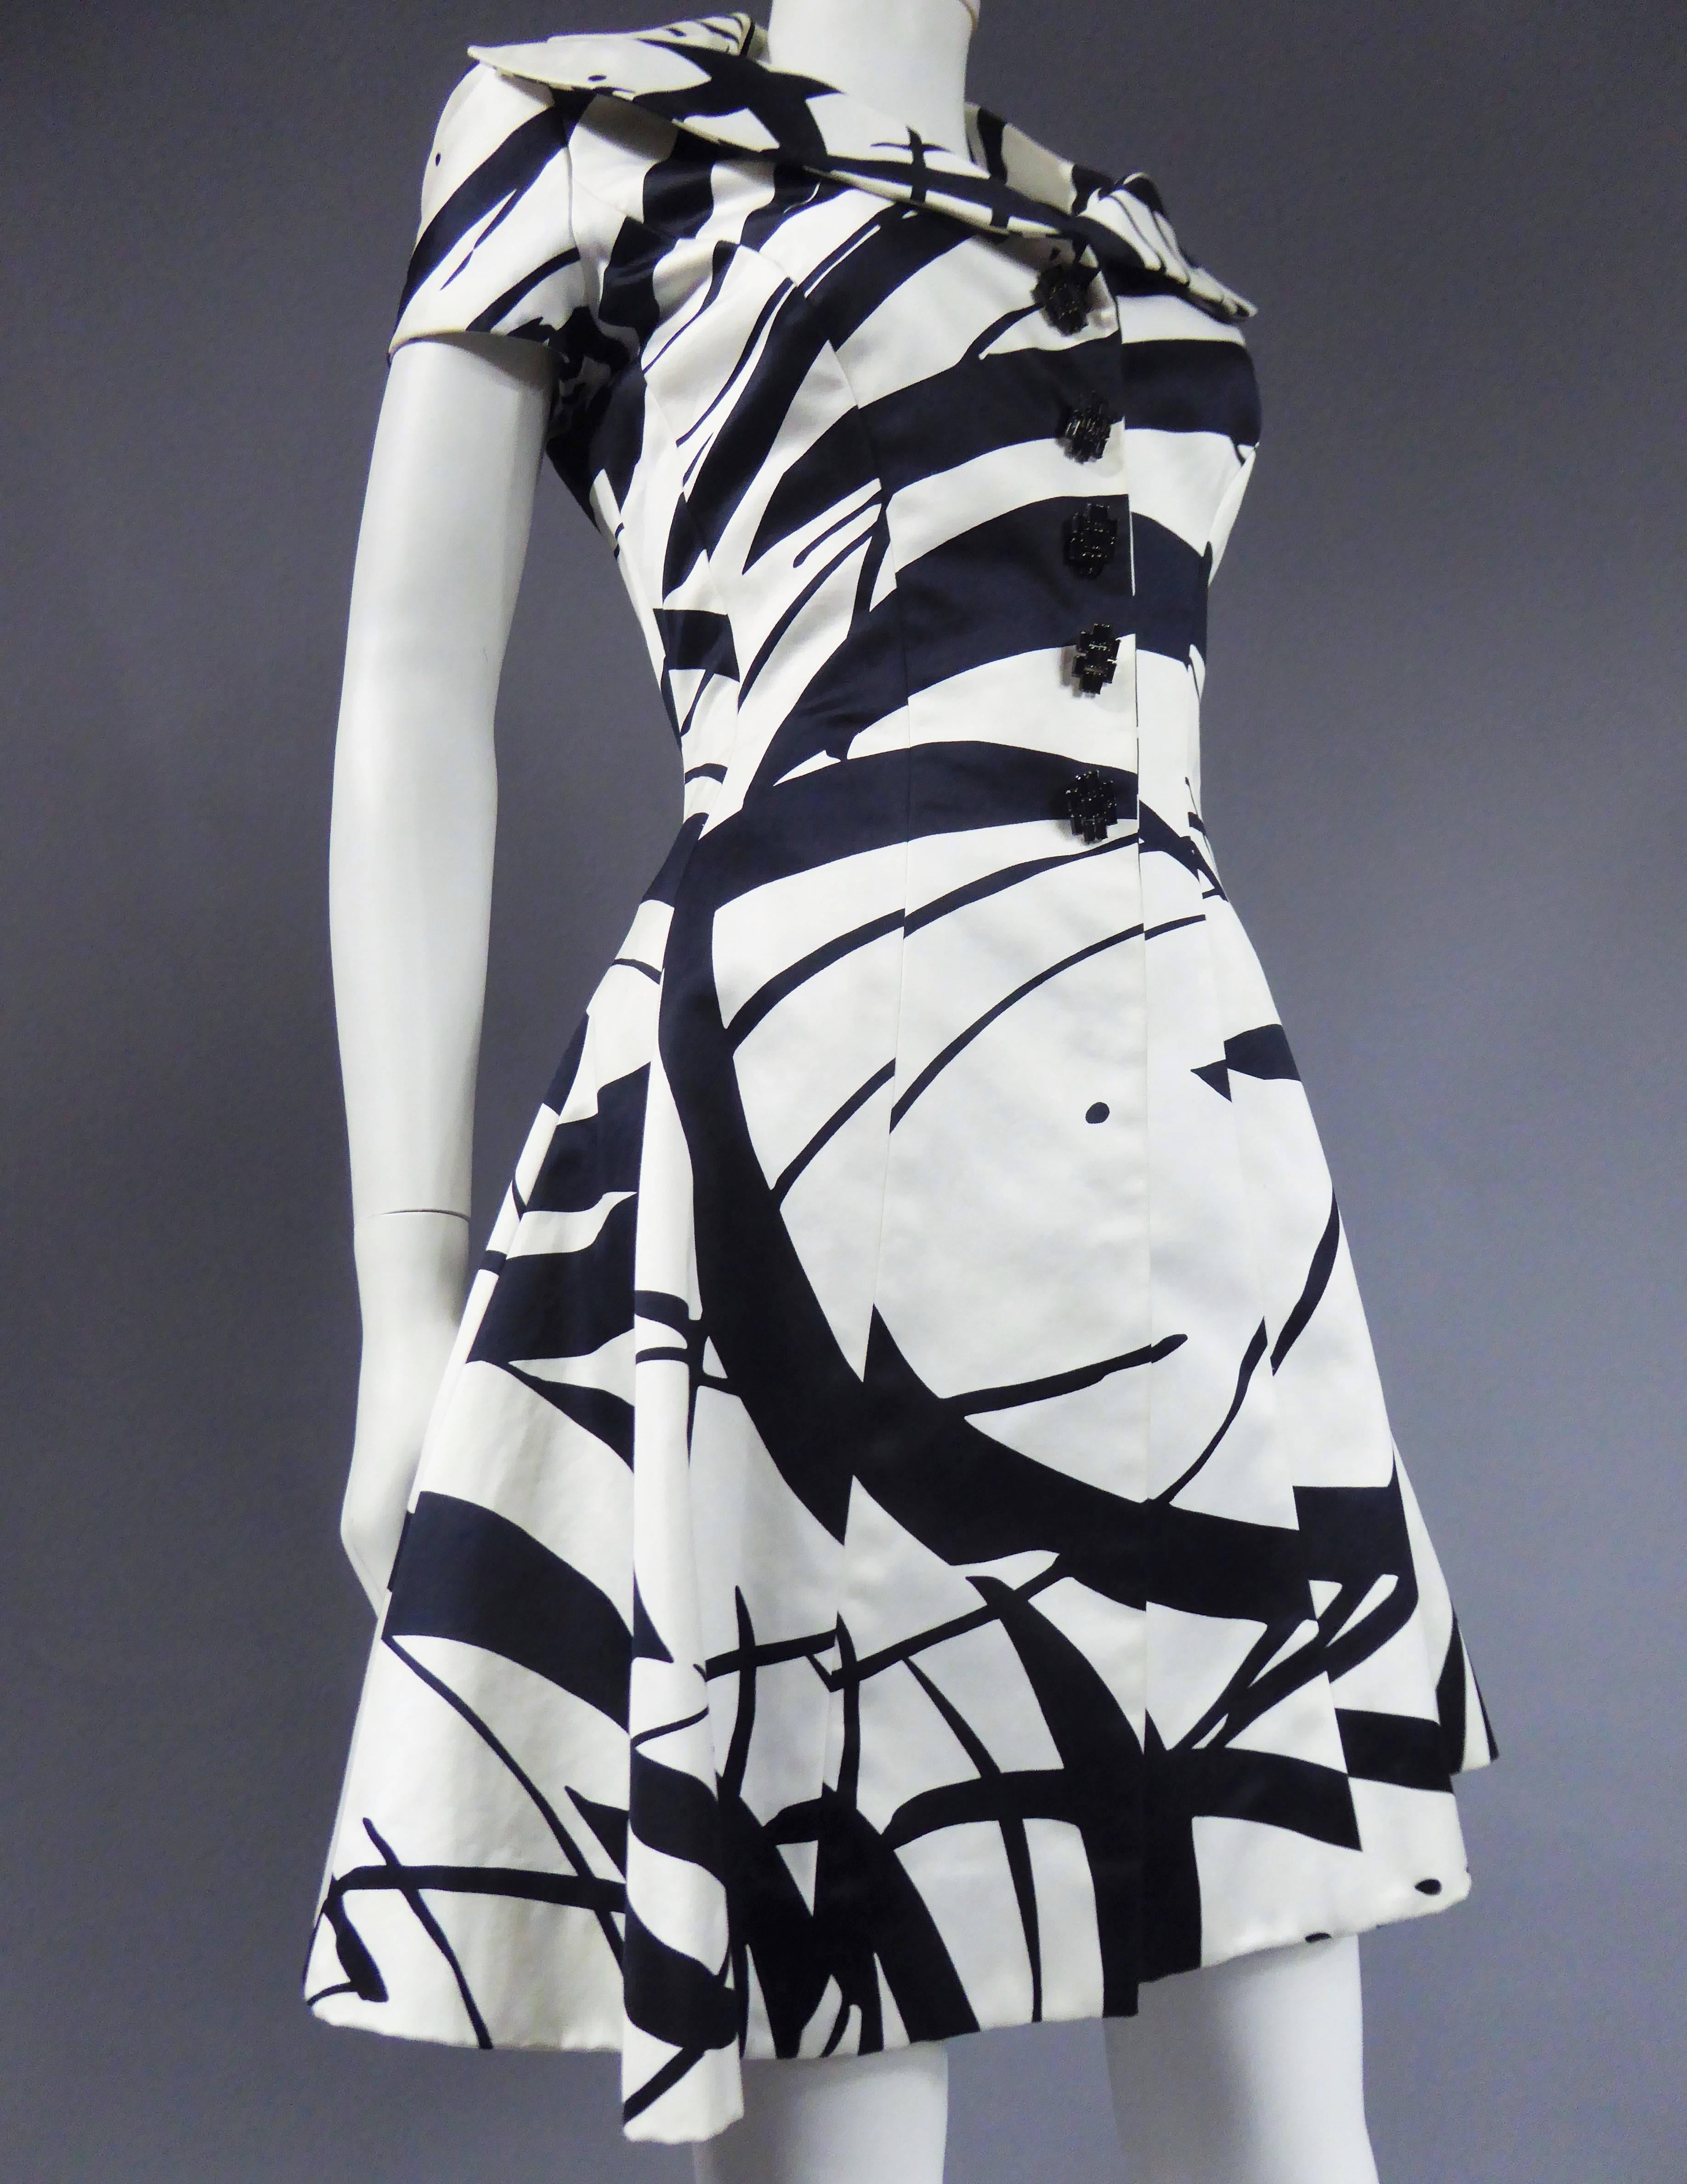 Circa 1985/1990

France

Ted Lapidus dress in thick printed silk satin. Artistic graphic of black lines on a white background, imitating thin and large brush strokes. Closes with five black Crystal jewelry buttons concealing snaps. Waisted waist,